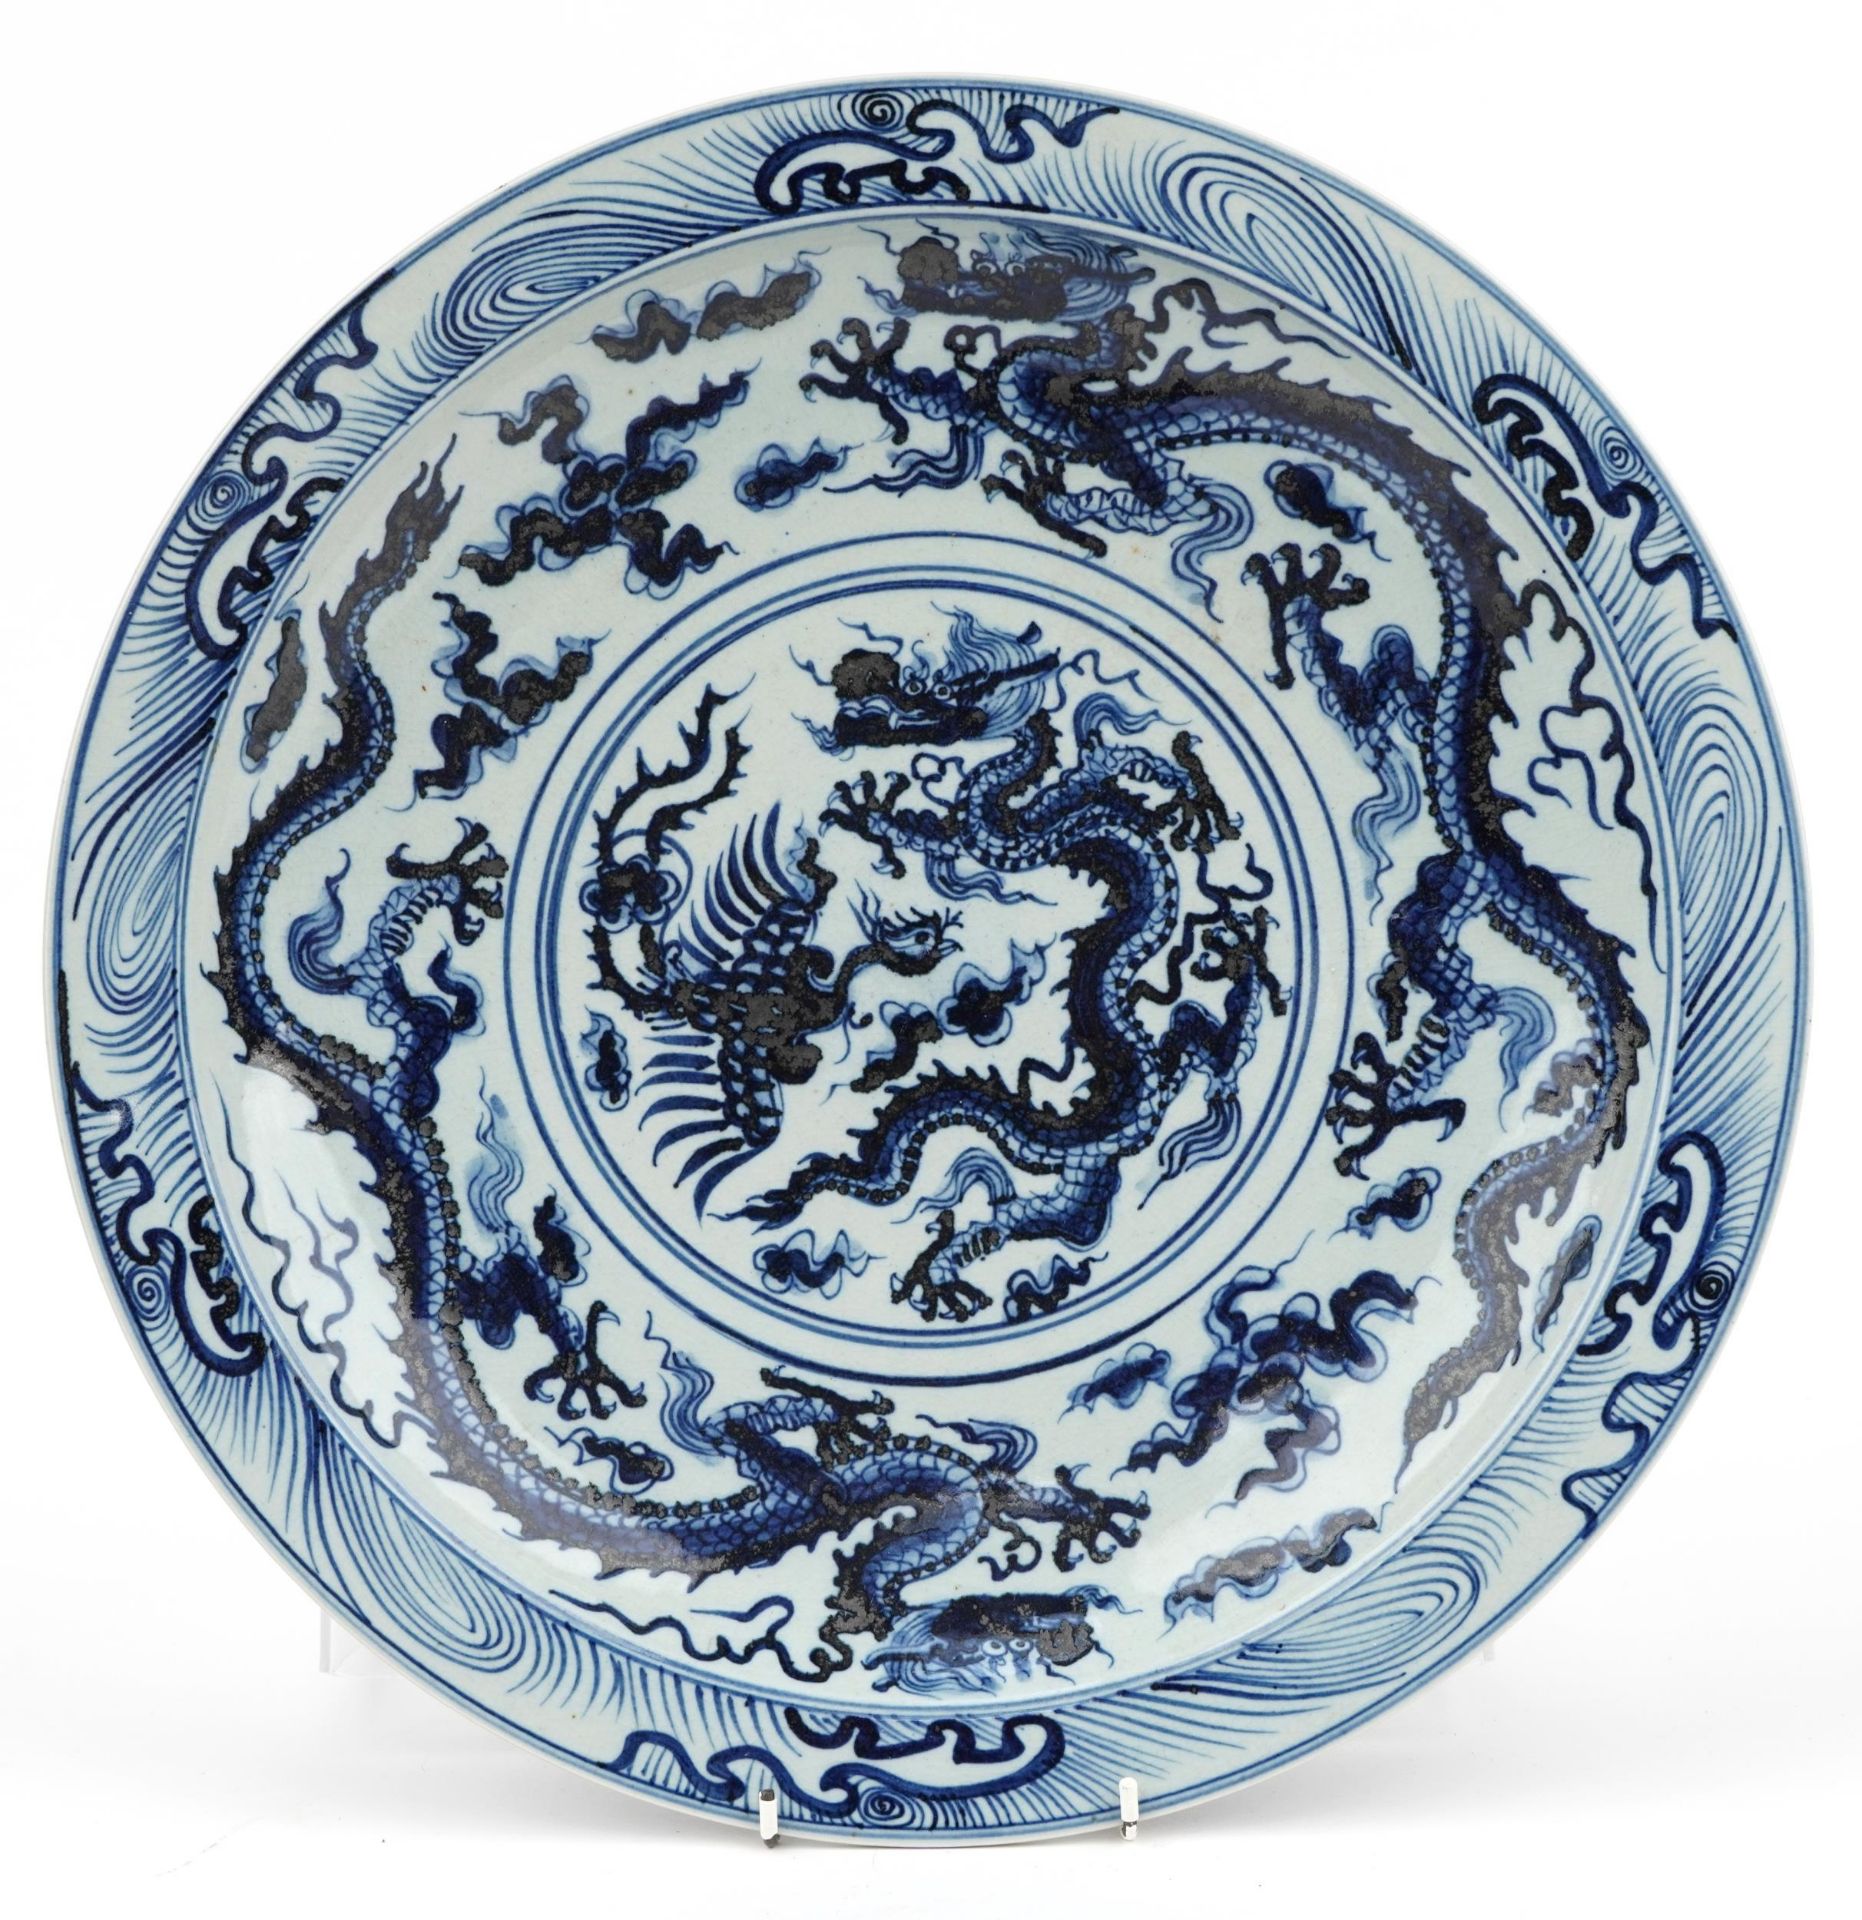 Chinese blue and white porcelain charger hand painted with dragons amongst clouds, character marks